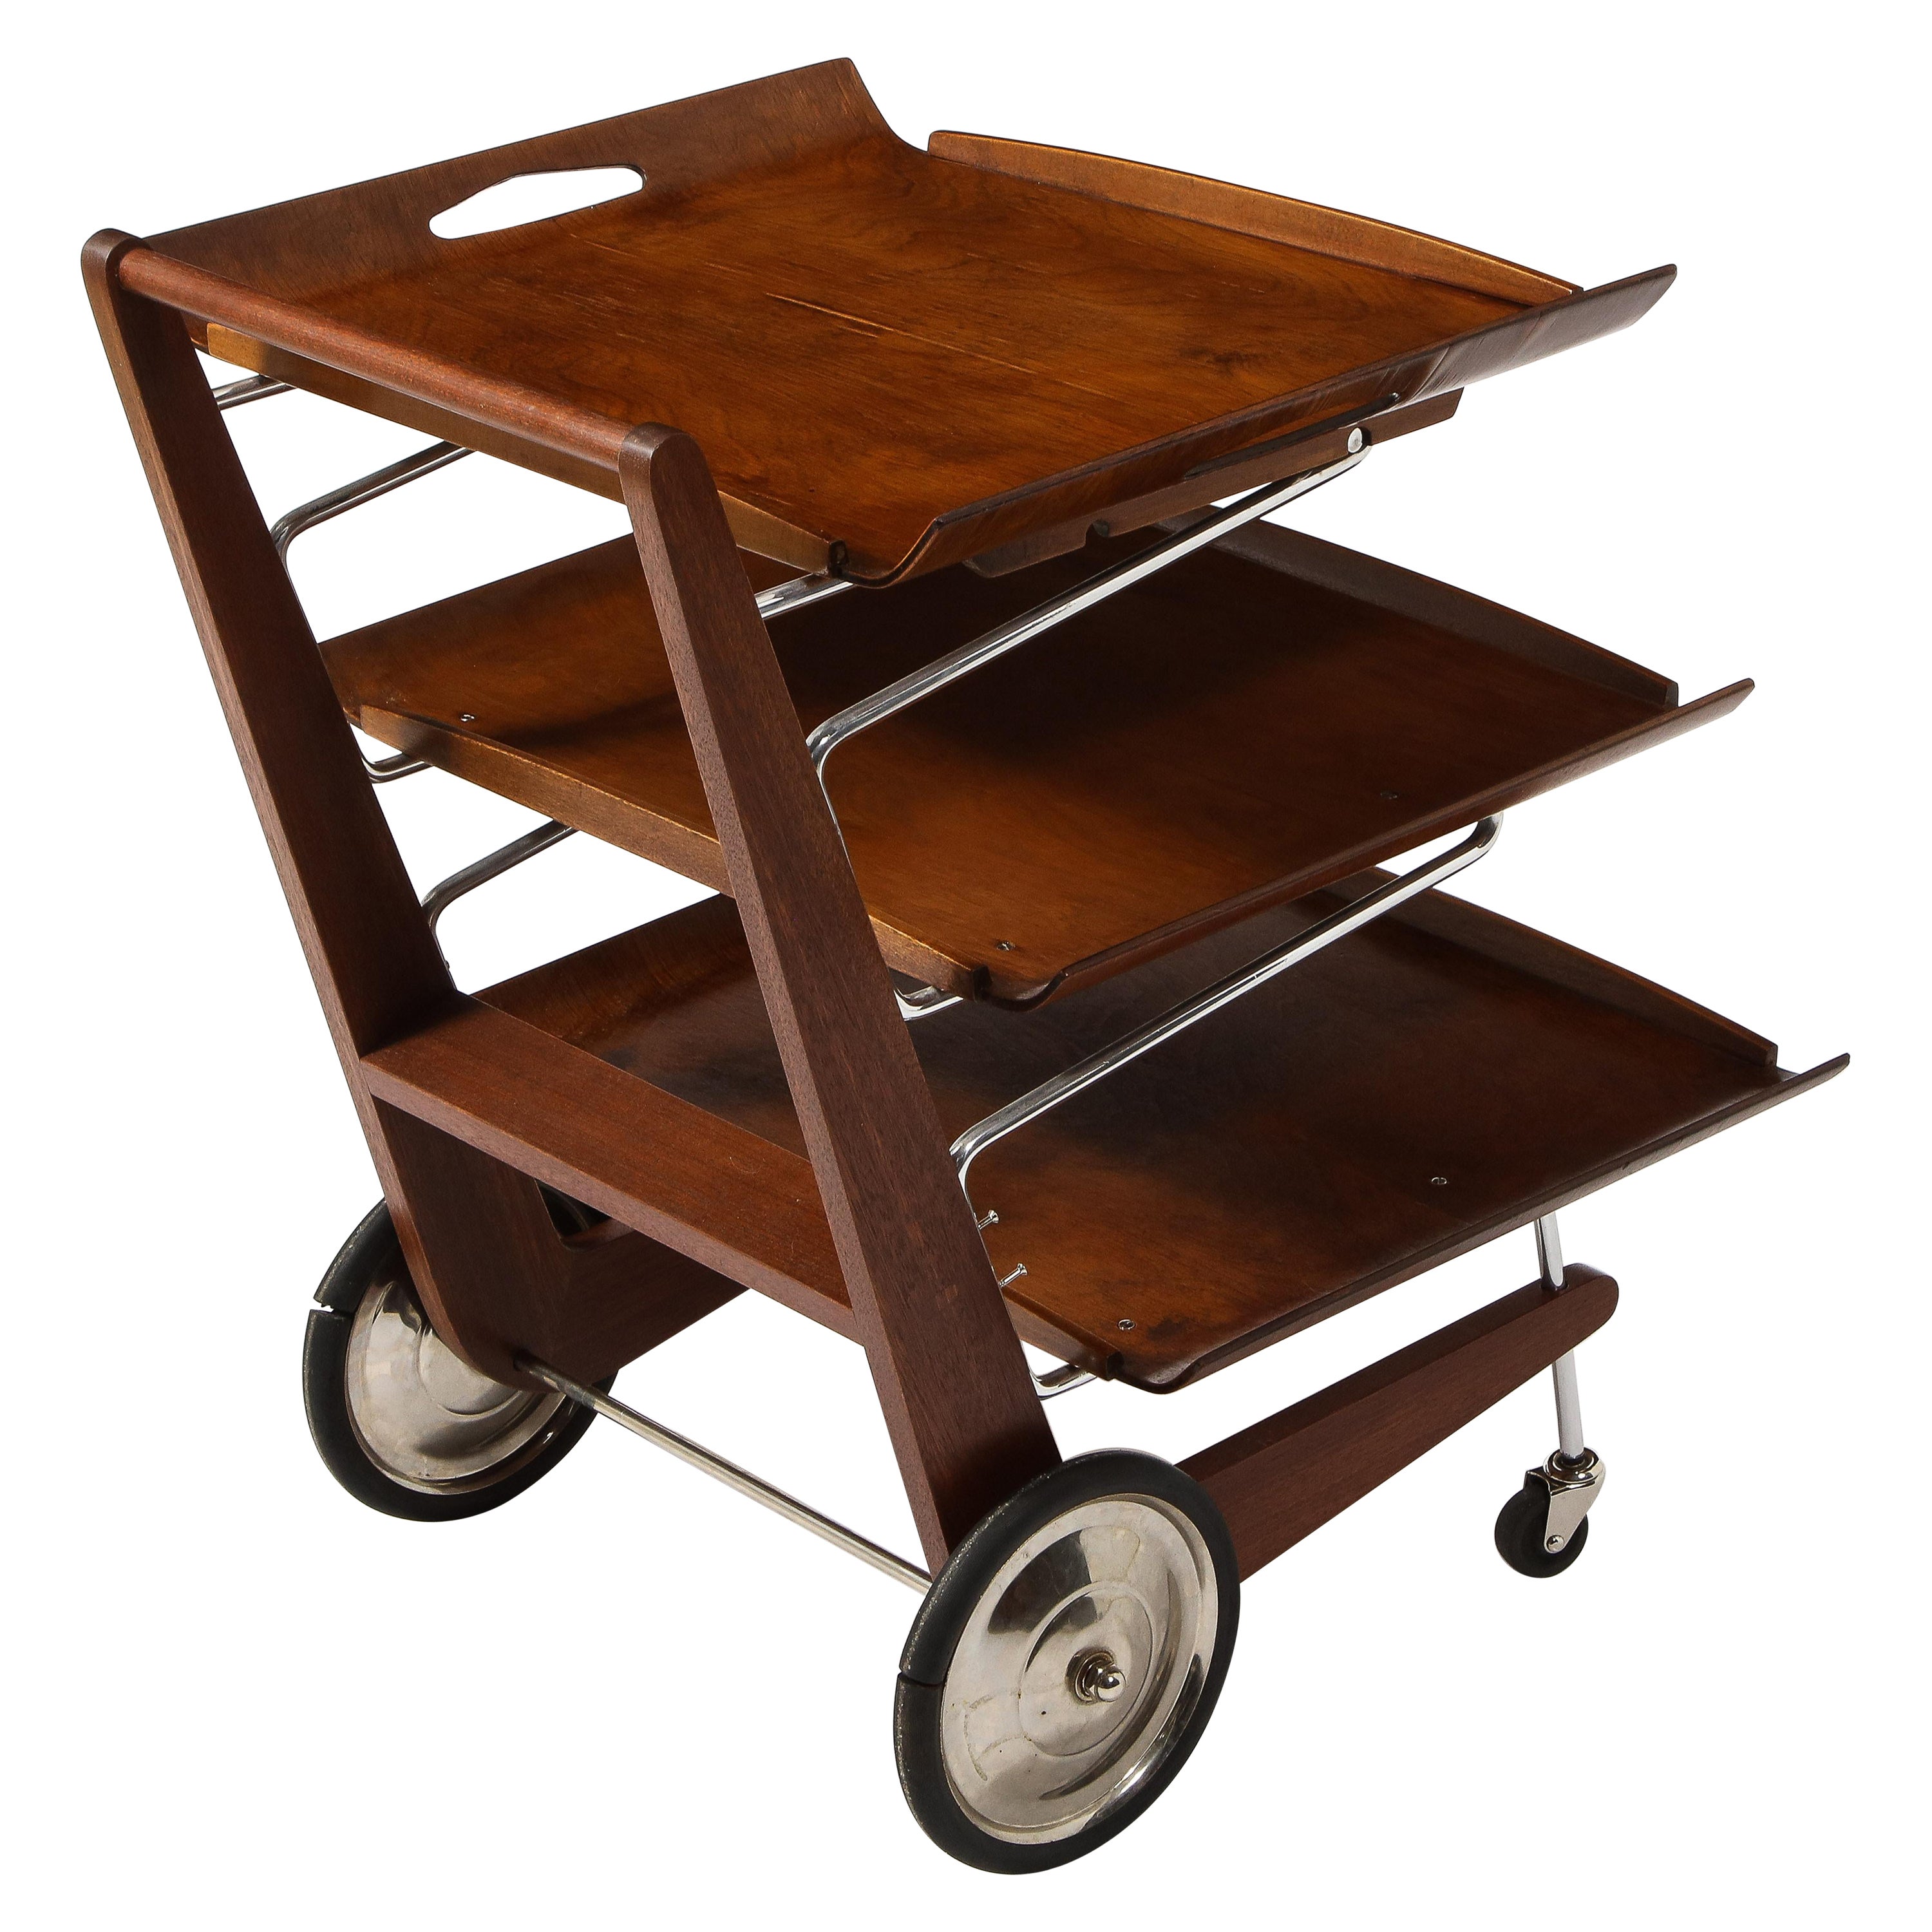 Exceptional modernist bar cart, created by a Czech architect for his house. It is made of aluminum and walnut; the trays are removable for serving. It has been professionally restored.